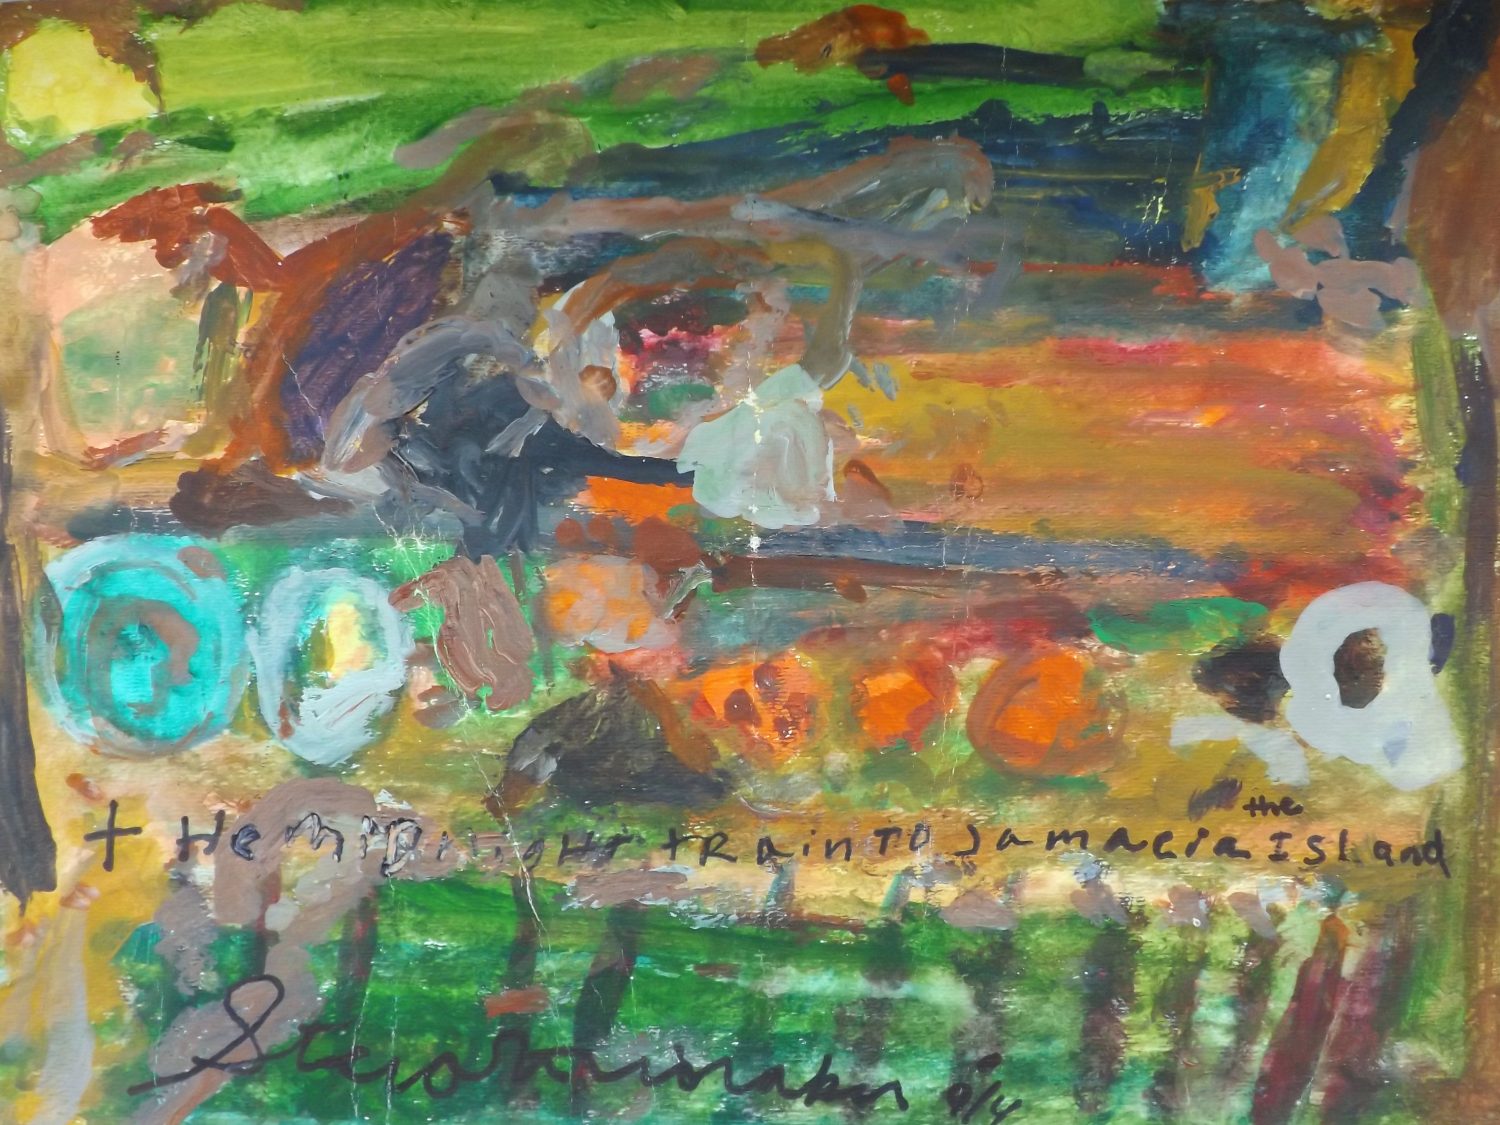 thumbnail of The Midnight Train to Jamaica the Island by Anonymous. Medium: Watercolor on paper. Date 2014